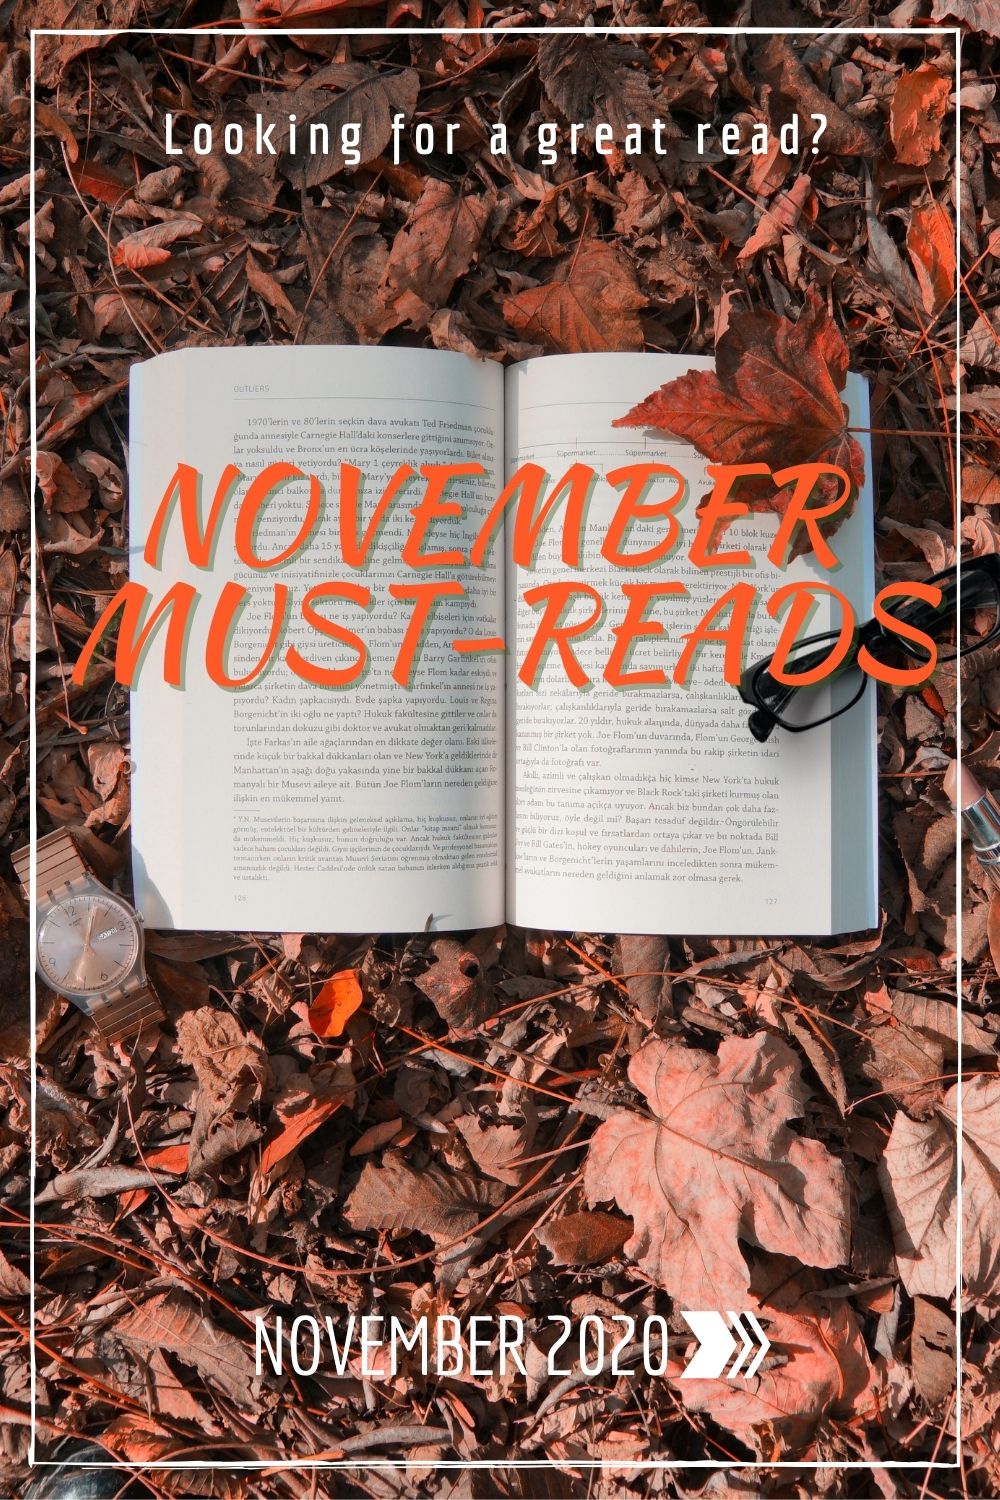 Must-read new books coming November 2020. Historical Fiction, Fantasy, Mystery, Romance and more!